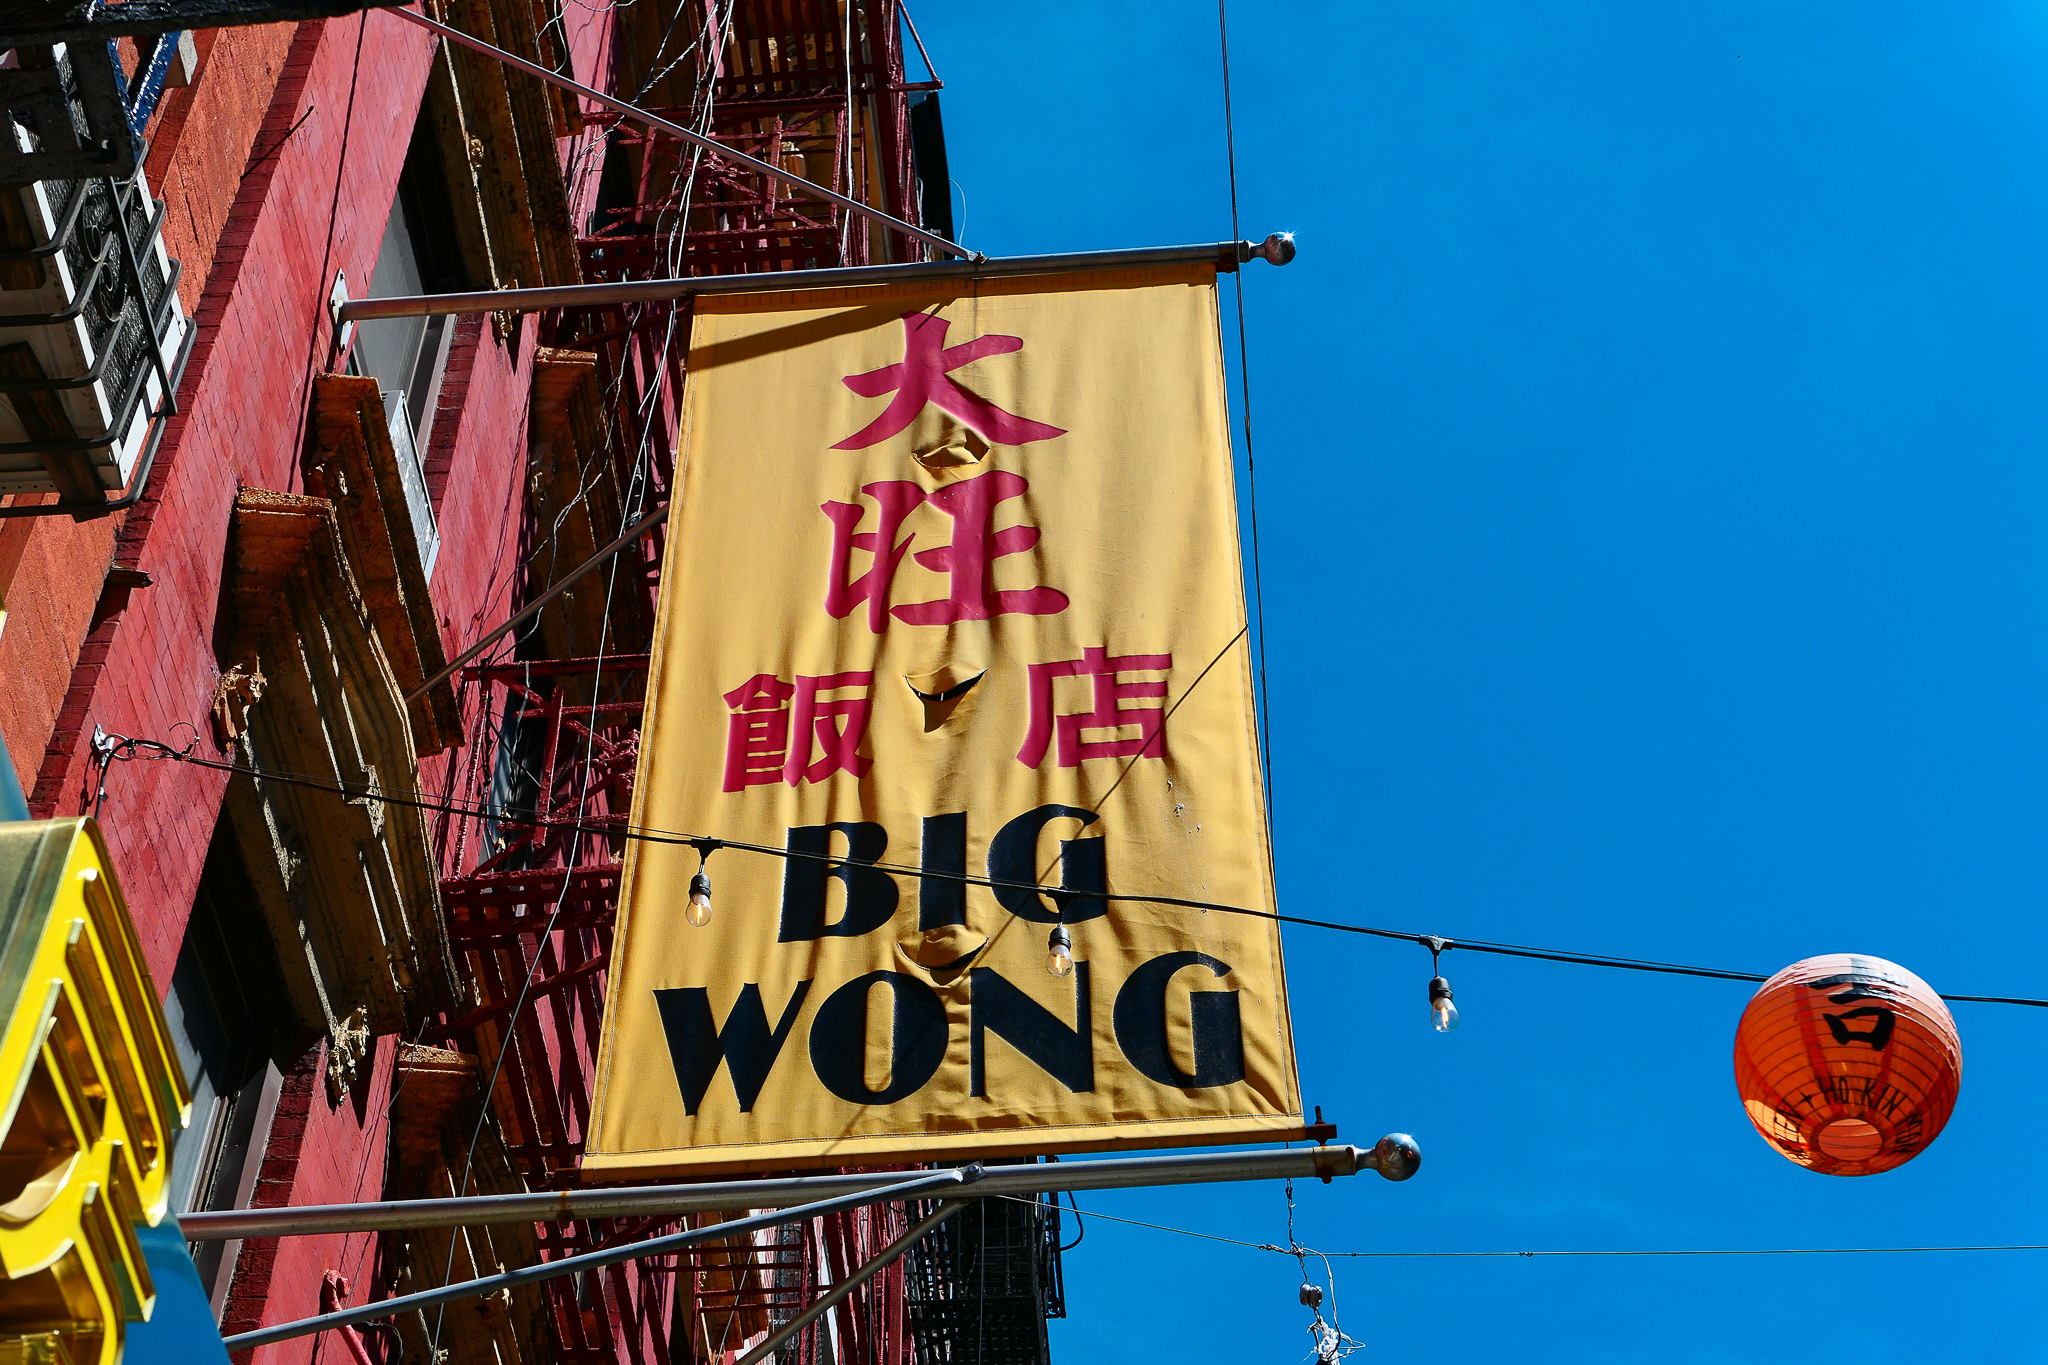 Bright yellow banner with '大旺' and 'Big Wong' on it, longer than it is wide, hanging on the side of a red brick building